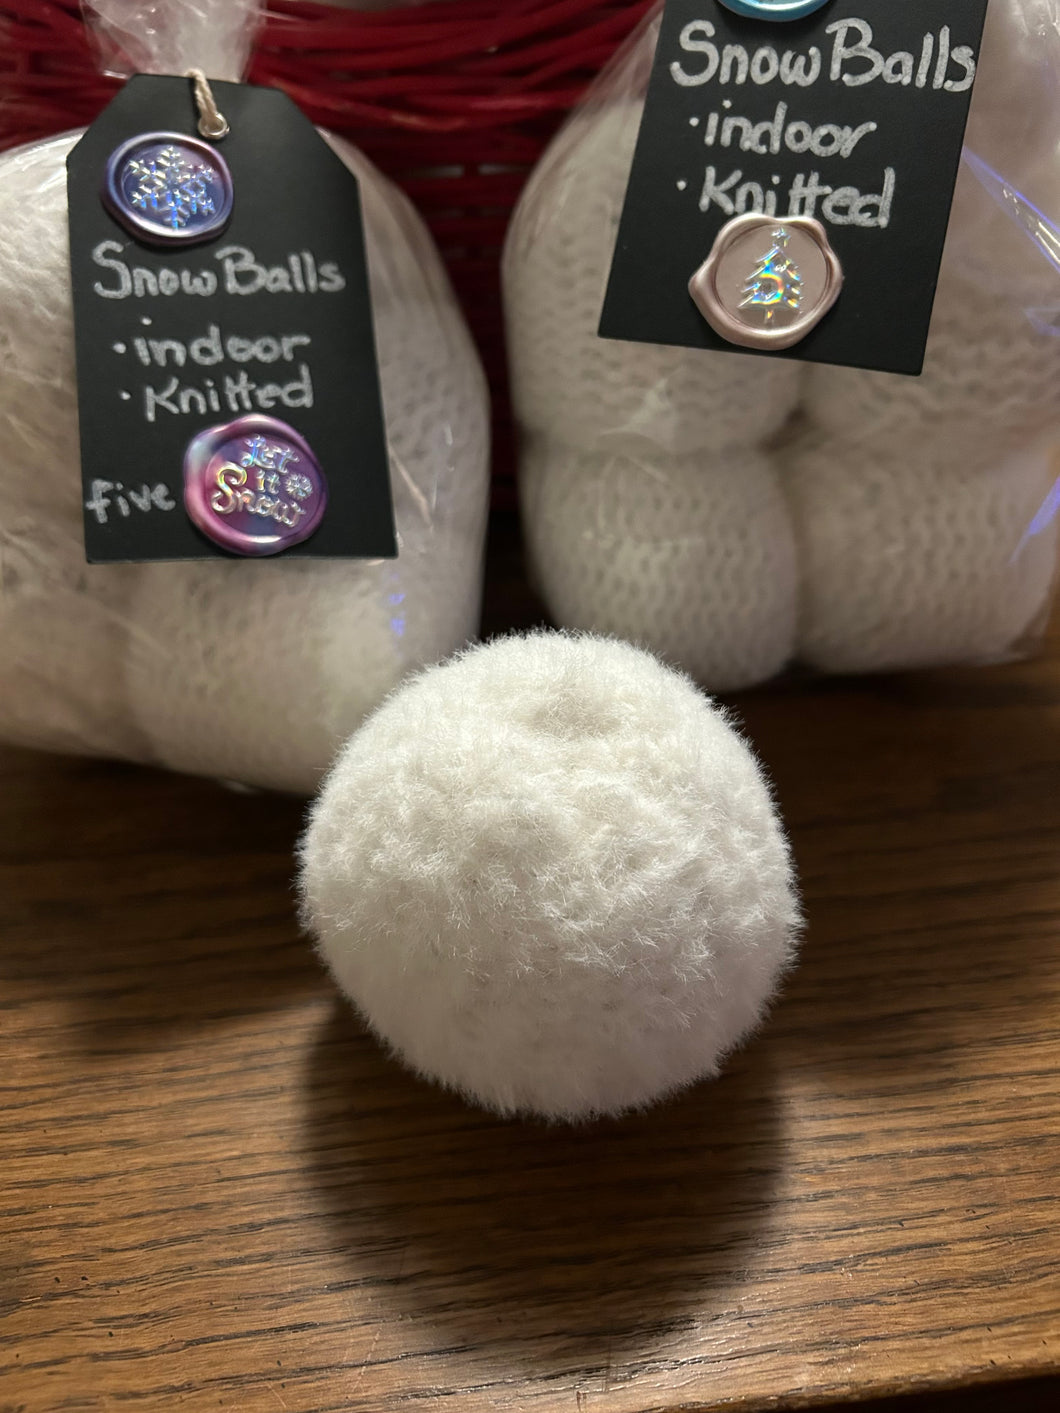 Knitted Indoor Snowballs